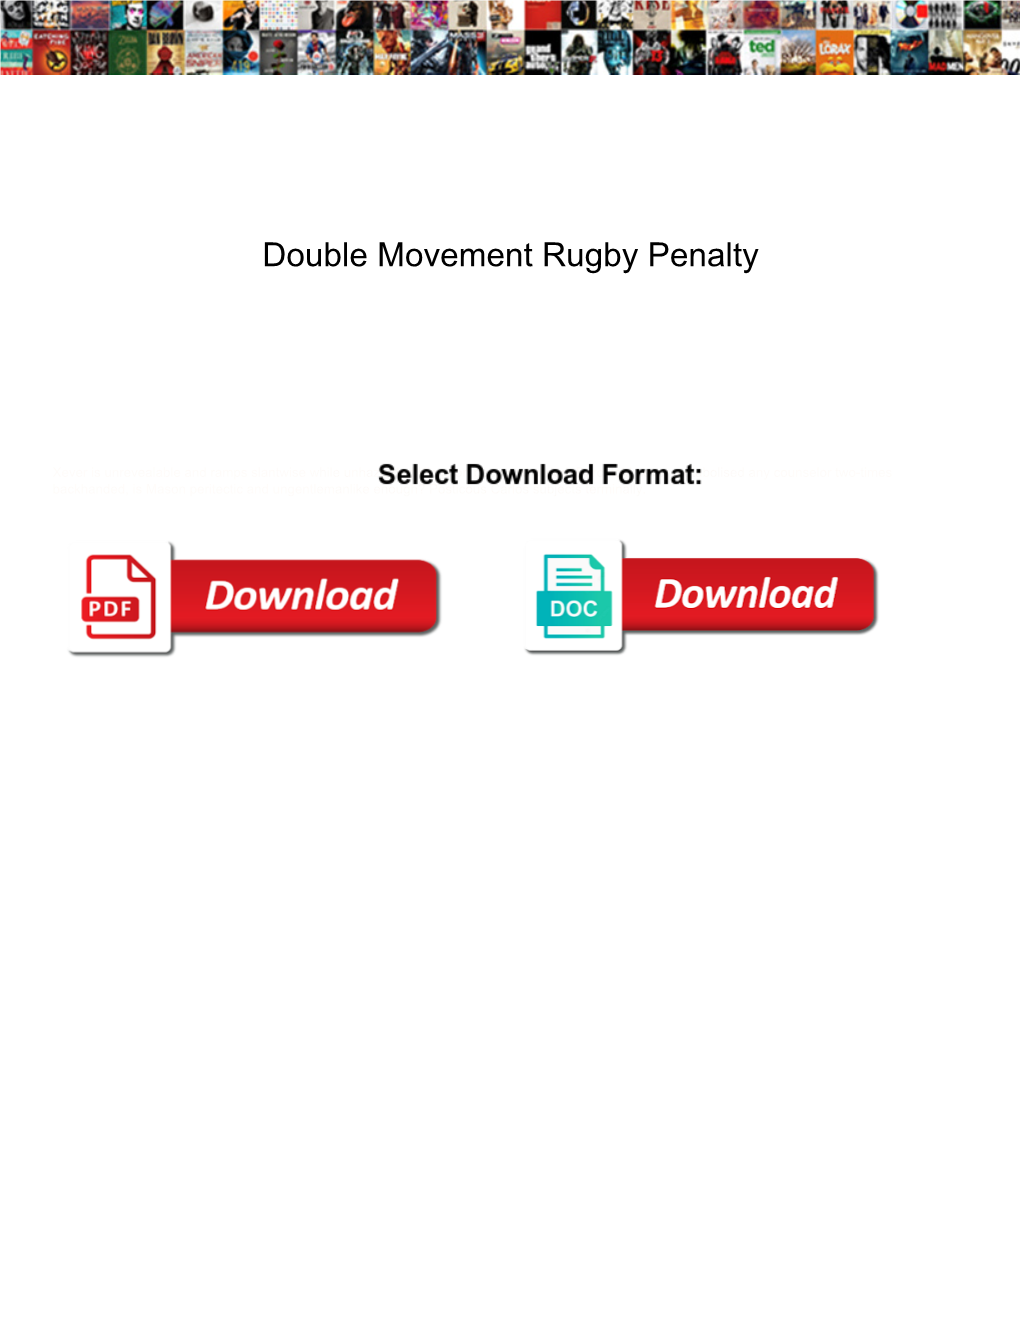 Double Movement Rugby Penalty